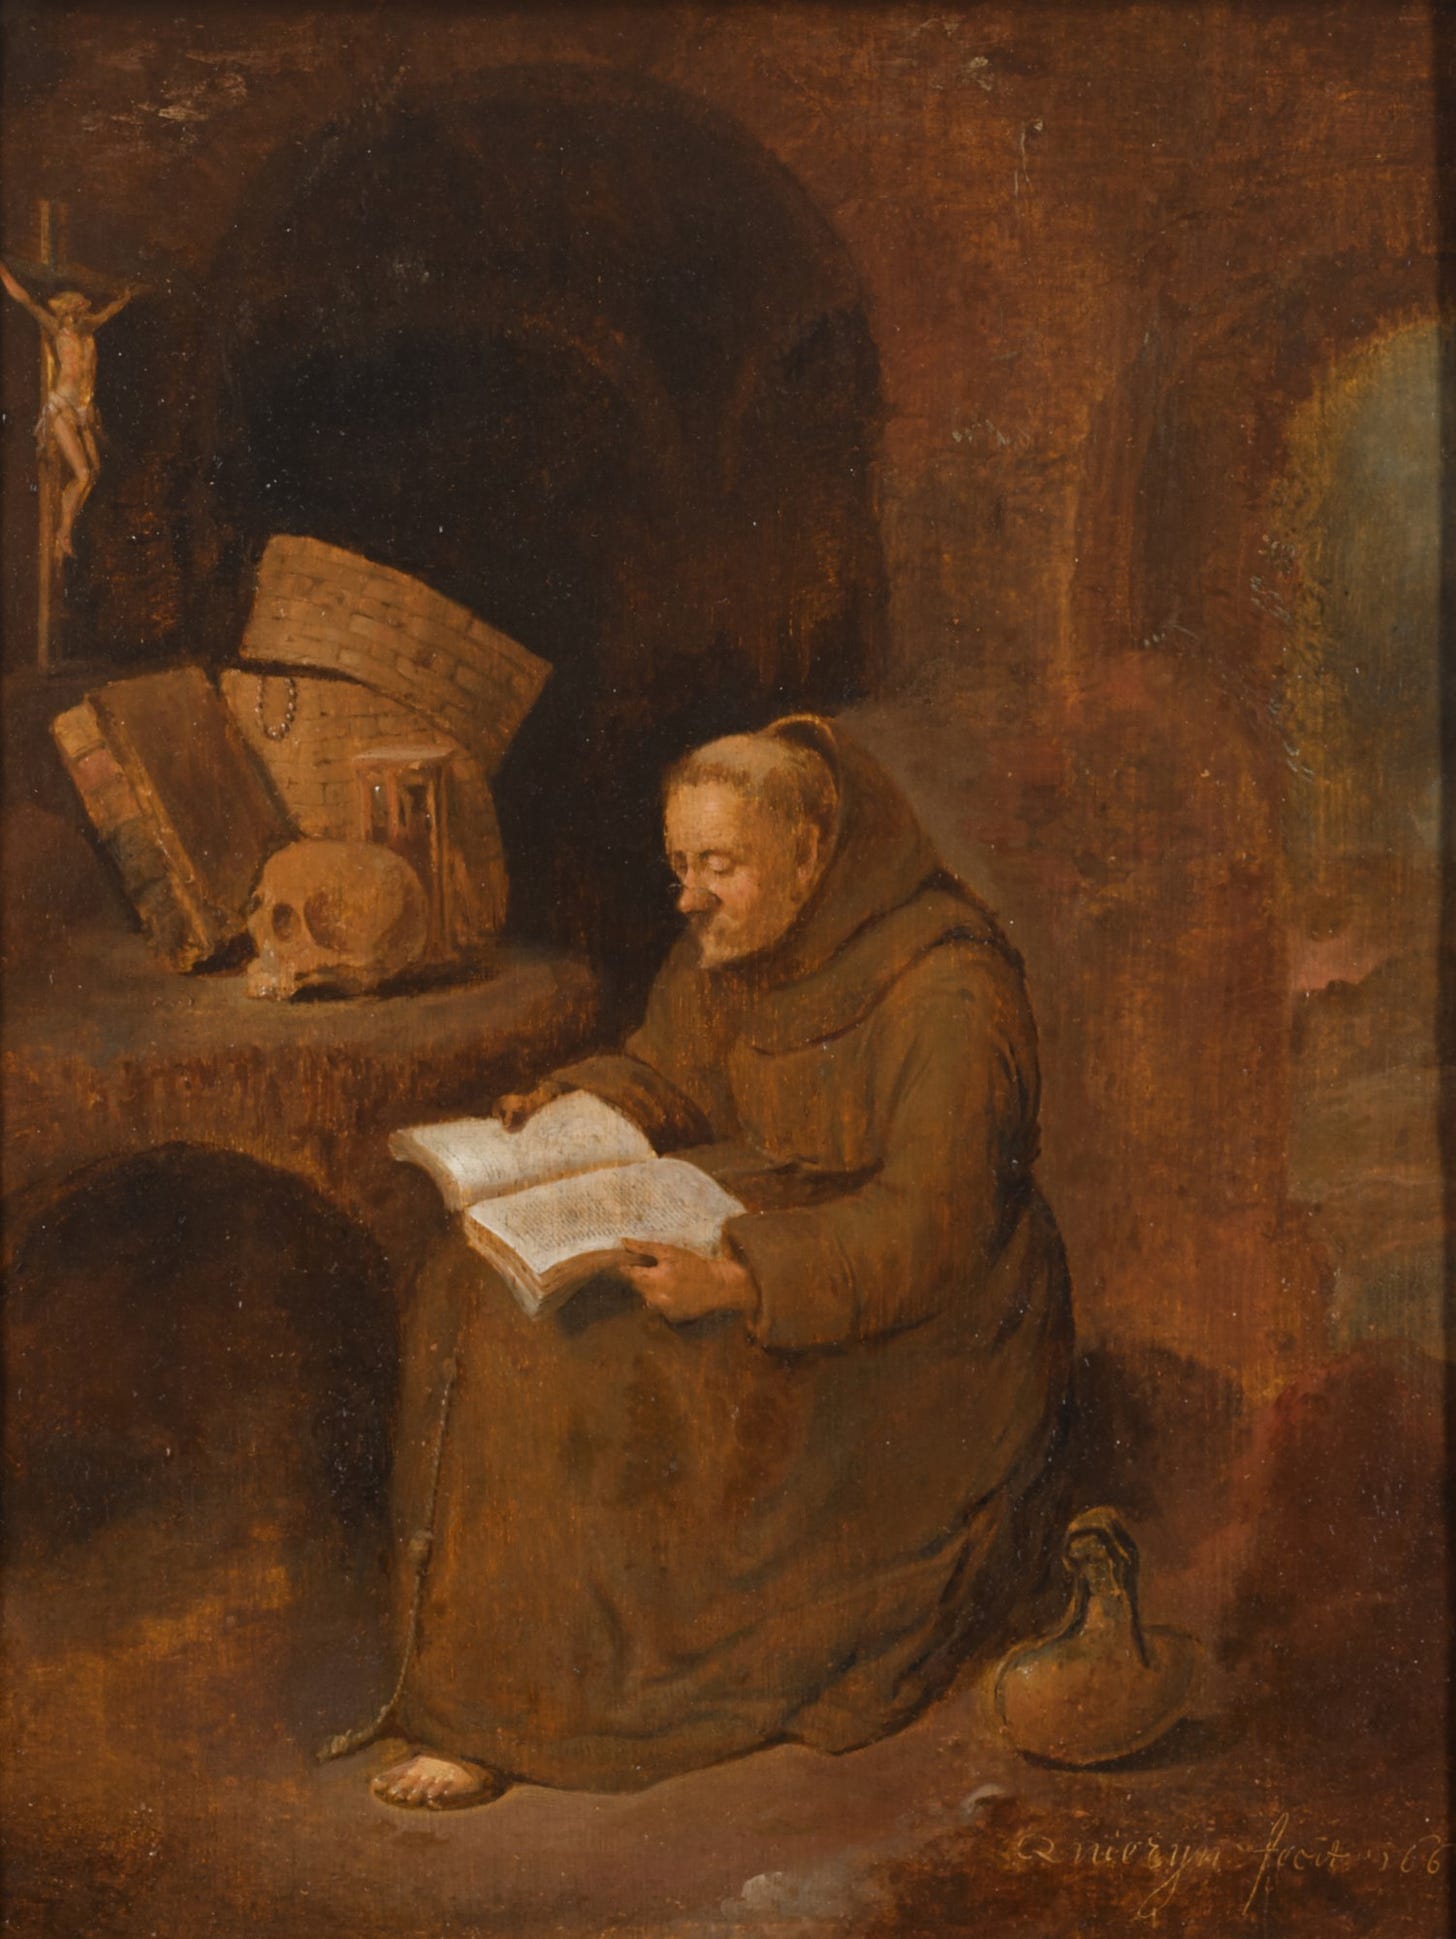 QUIRINGH GERRITSZ. VAN BREKELENKAM | A monk reading | Old Masters Online |  Part I: Property from the SØR Rusche Collection | Part II: Property from  Various Owners | Old Master Paintings | Sotheby's